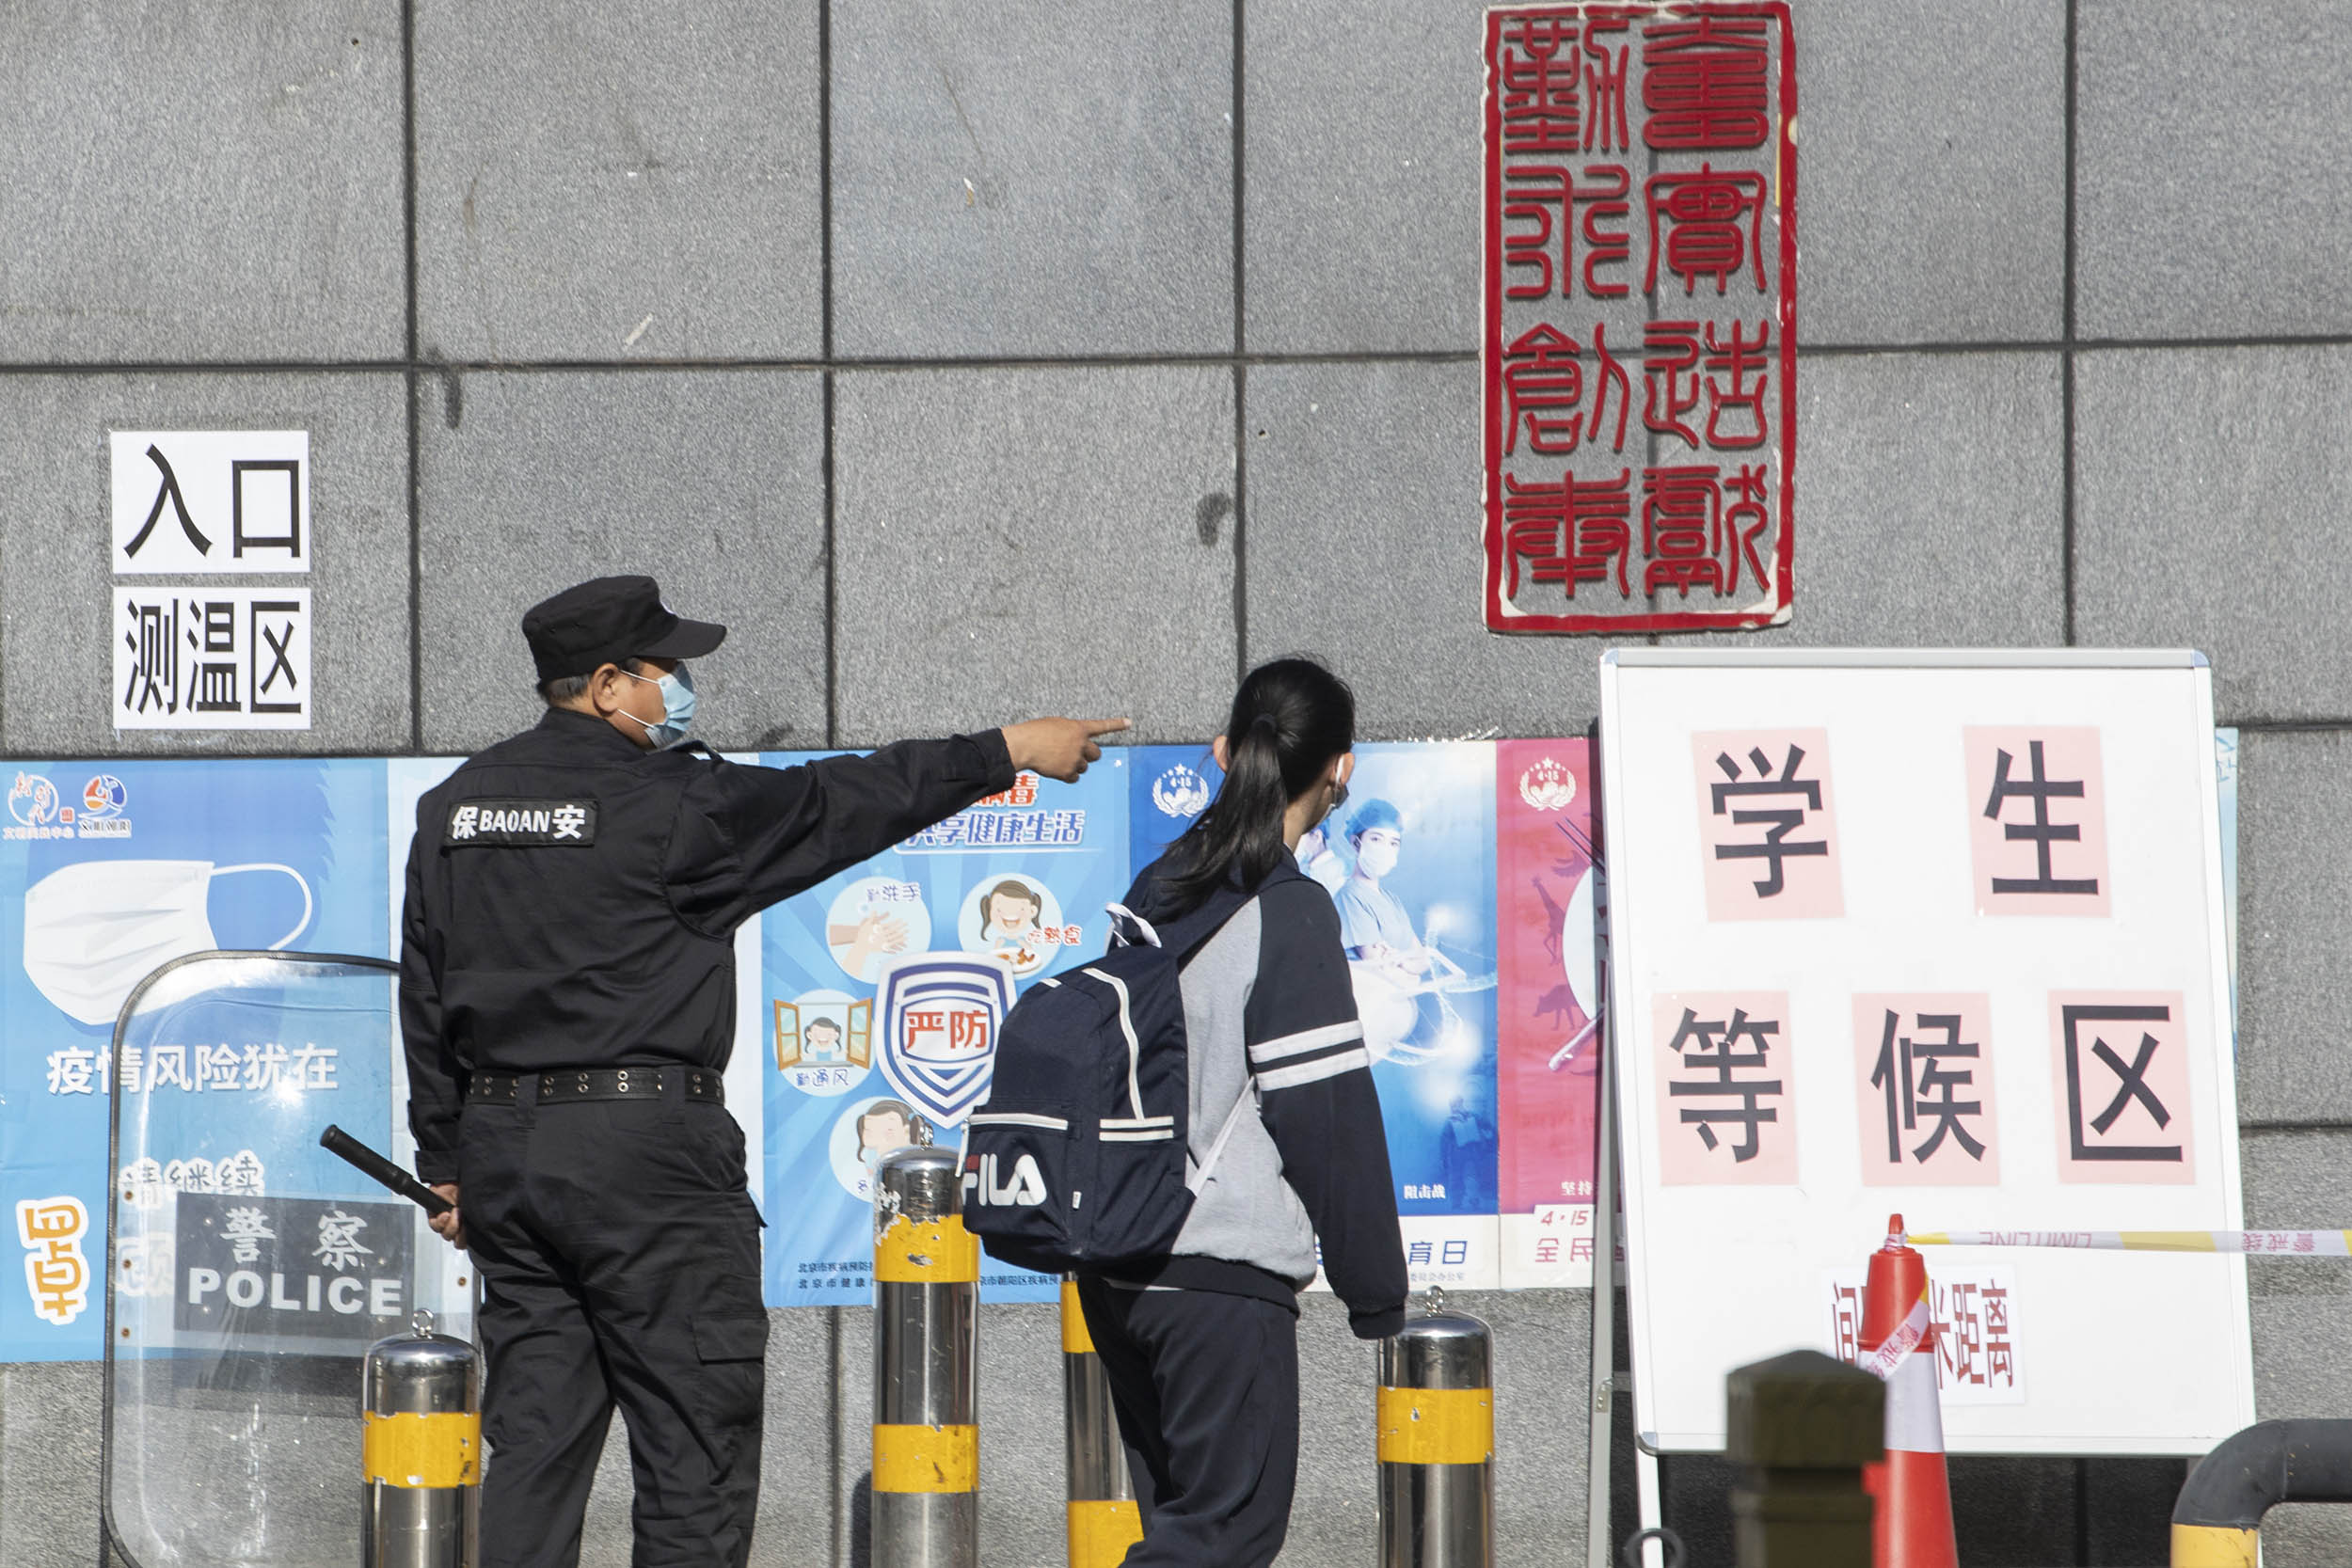 A security guard directs a student near a sign reading "Waiting Zone for Students " during the reopening of school in Beijing, China, on May 11. 